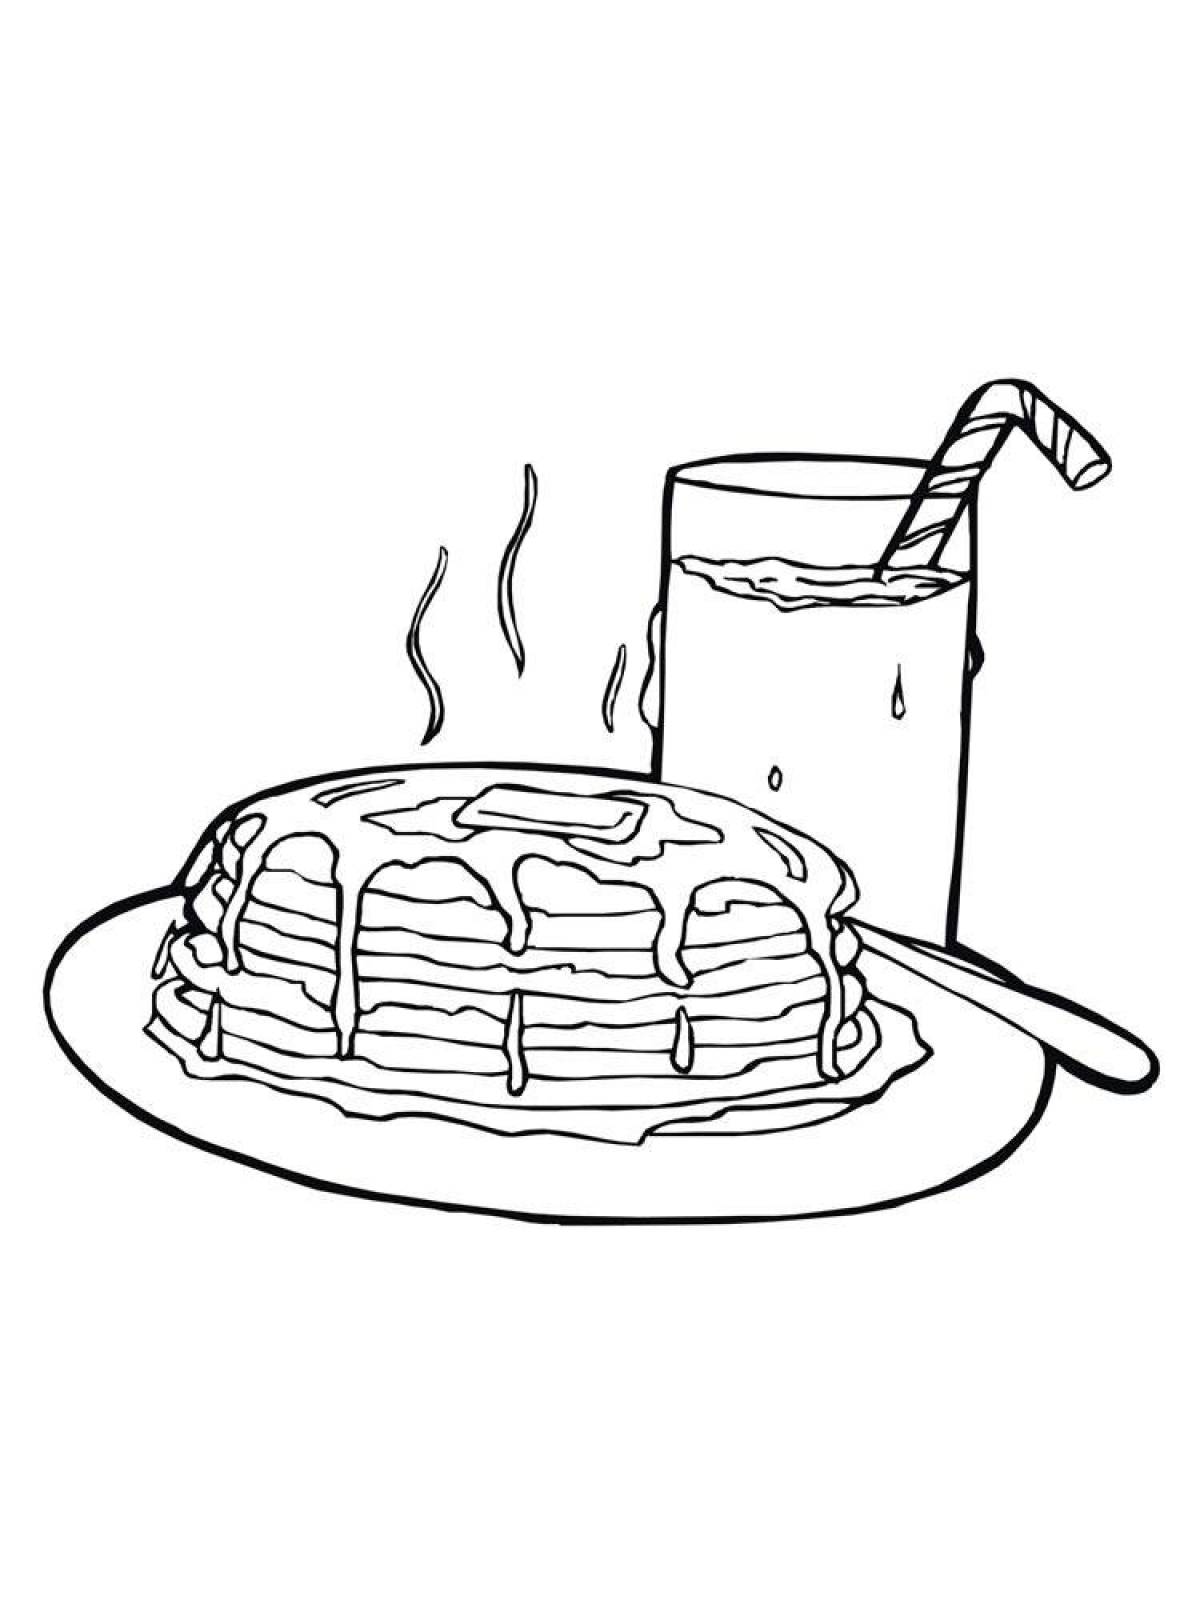 Coloring page healthy pancakes